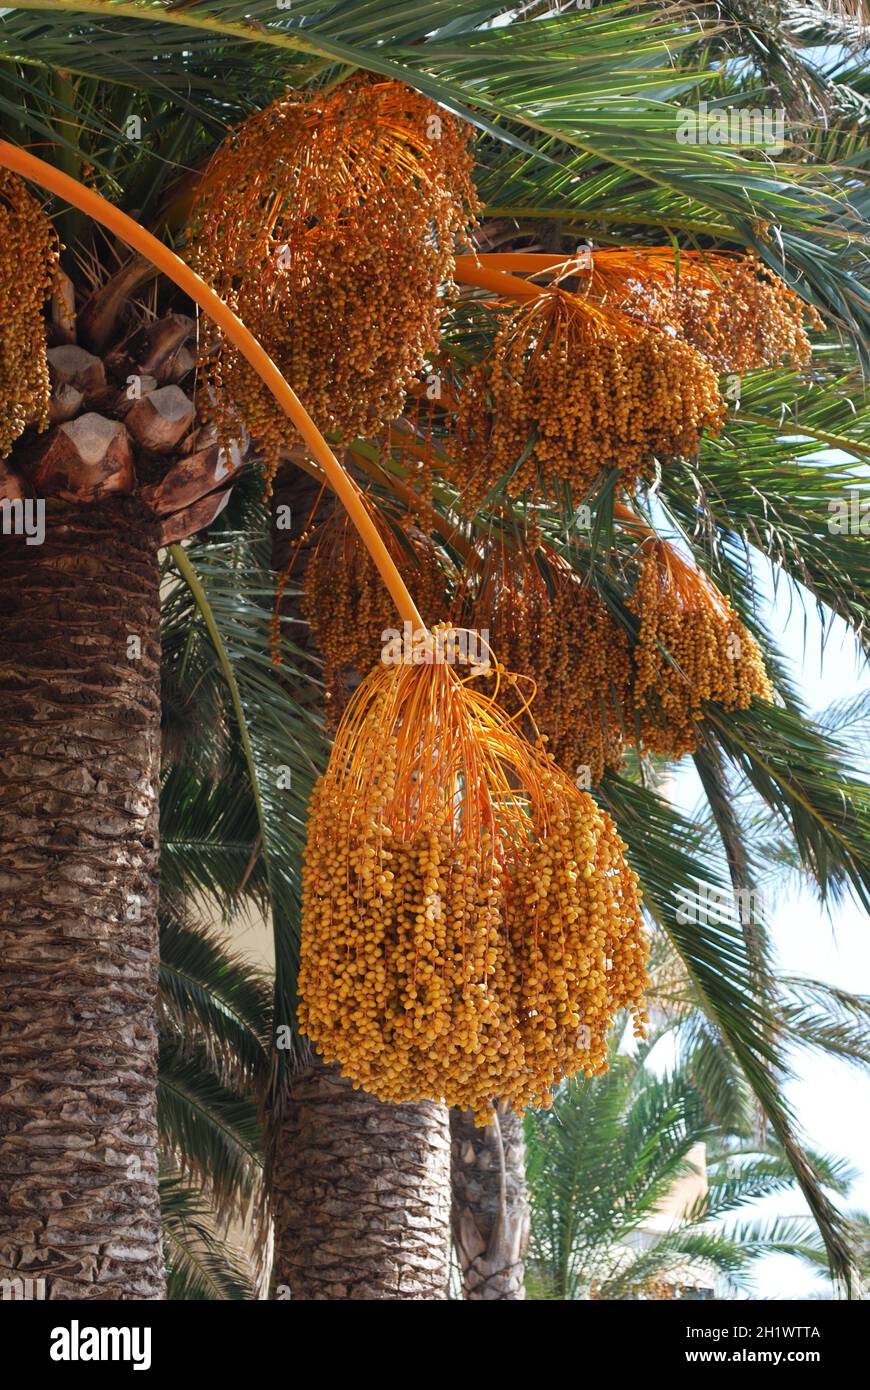 Palm tree laden with dates, Lagos, Malaga Province, Andalusia, Spain, Western Europe. Stock Photo